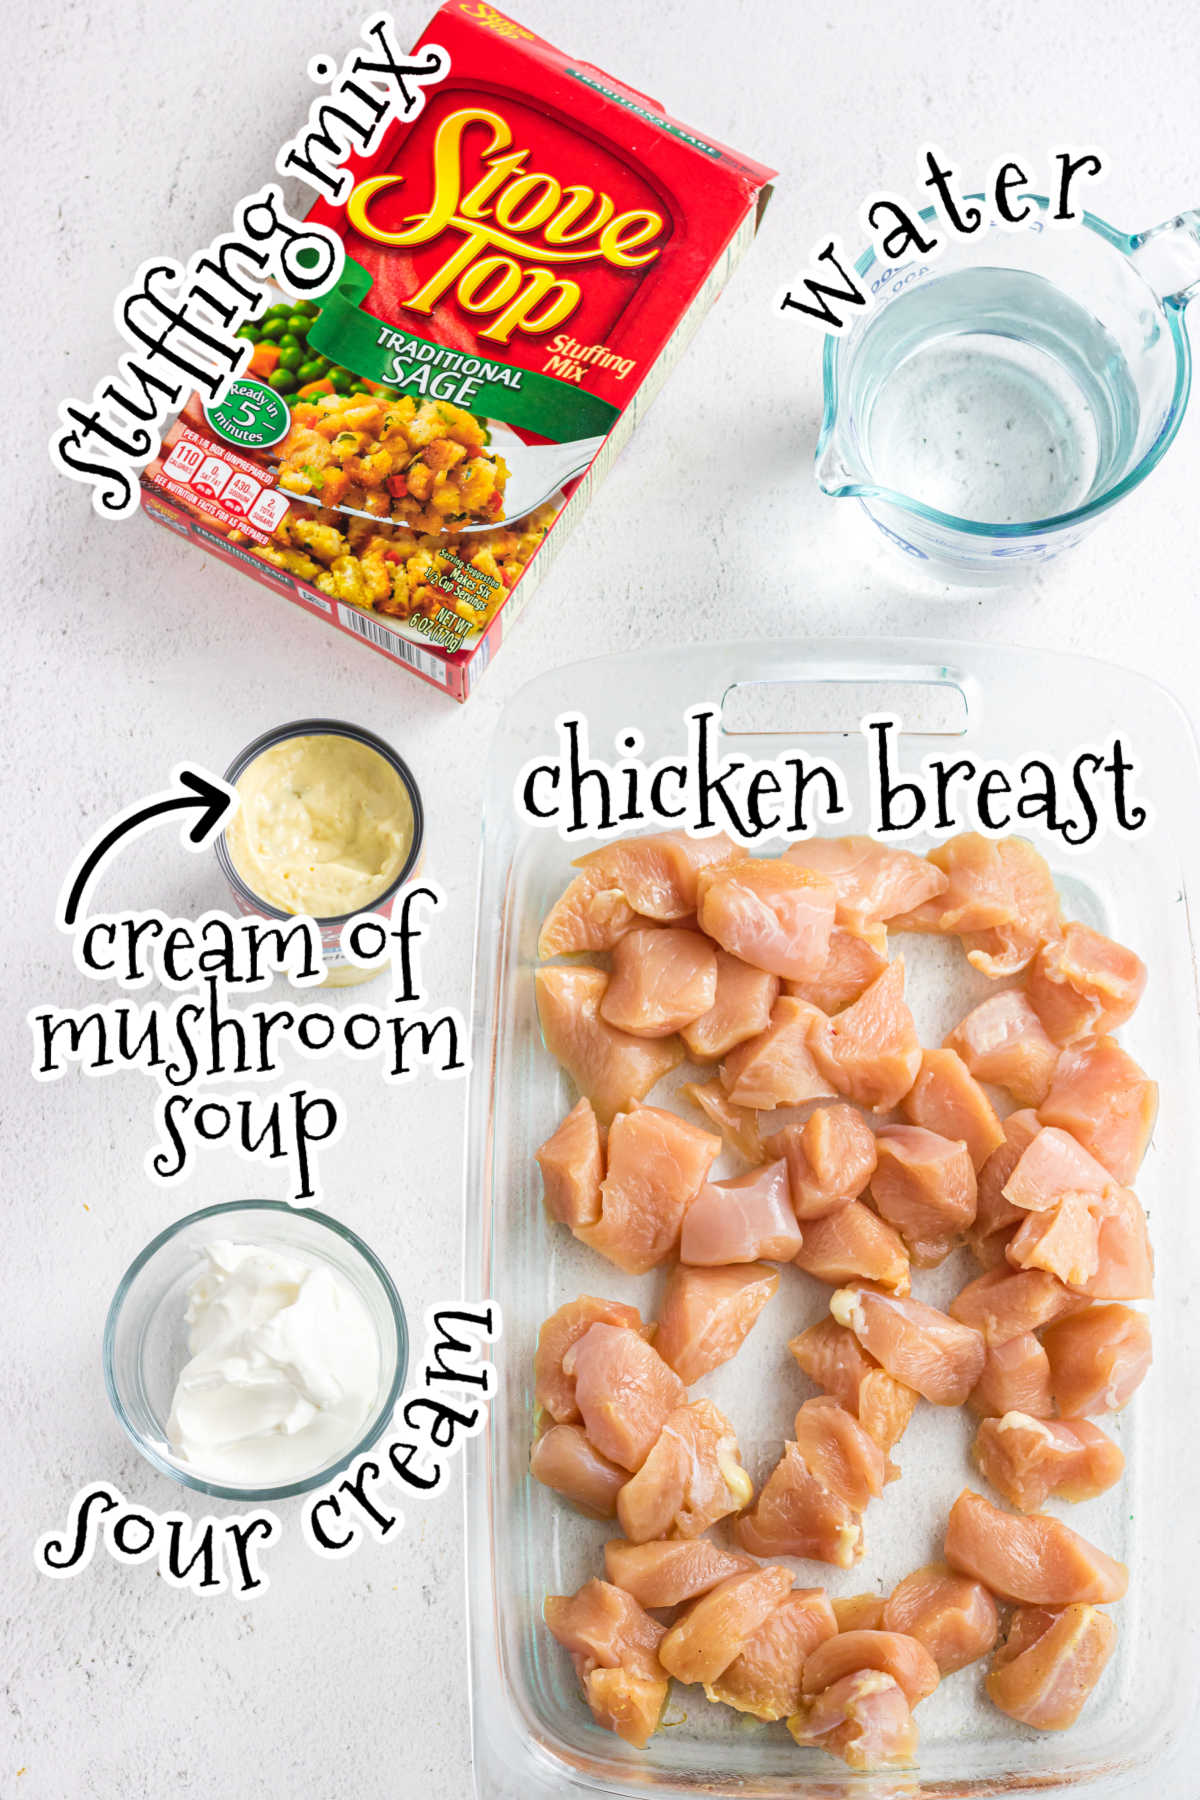 Ingredients for chicken and stuffing casserole.